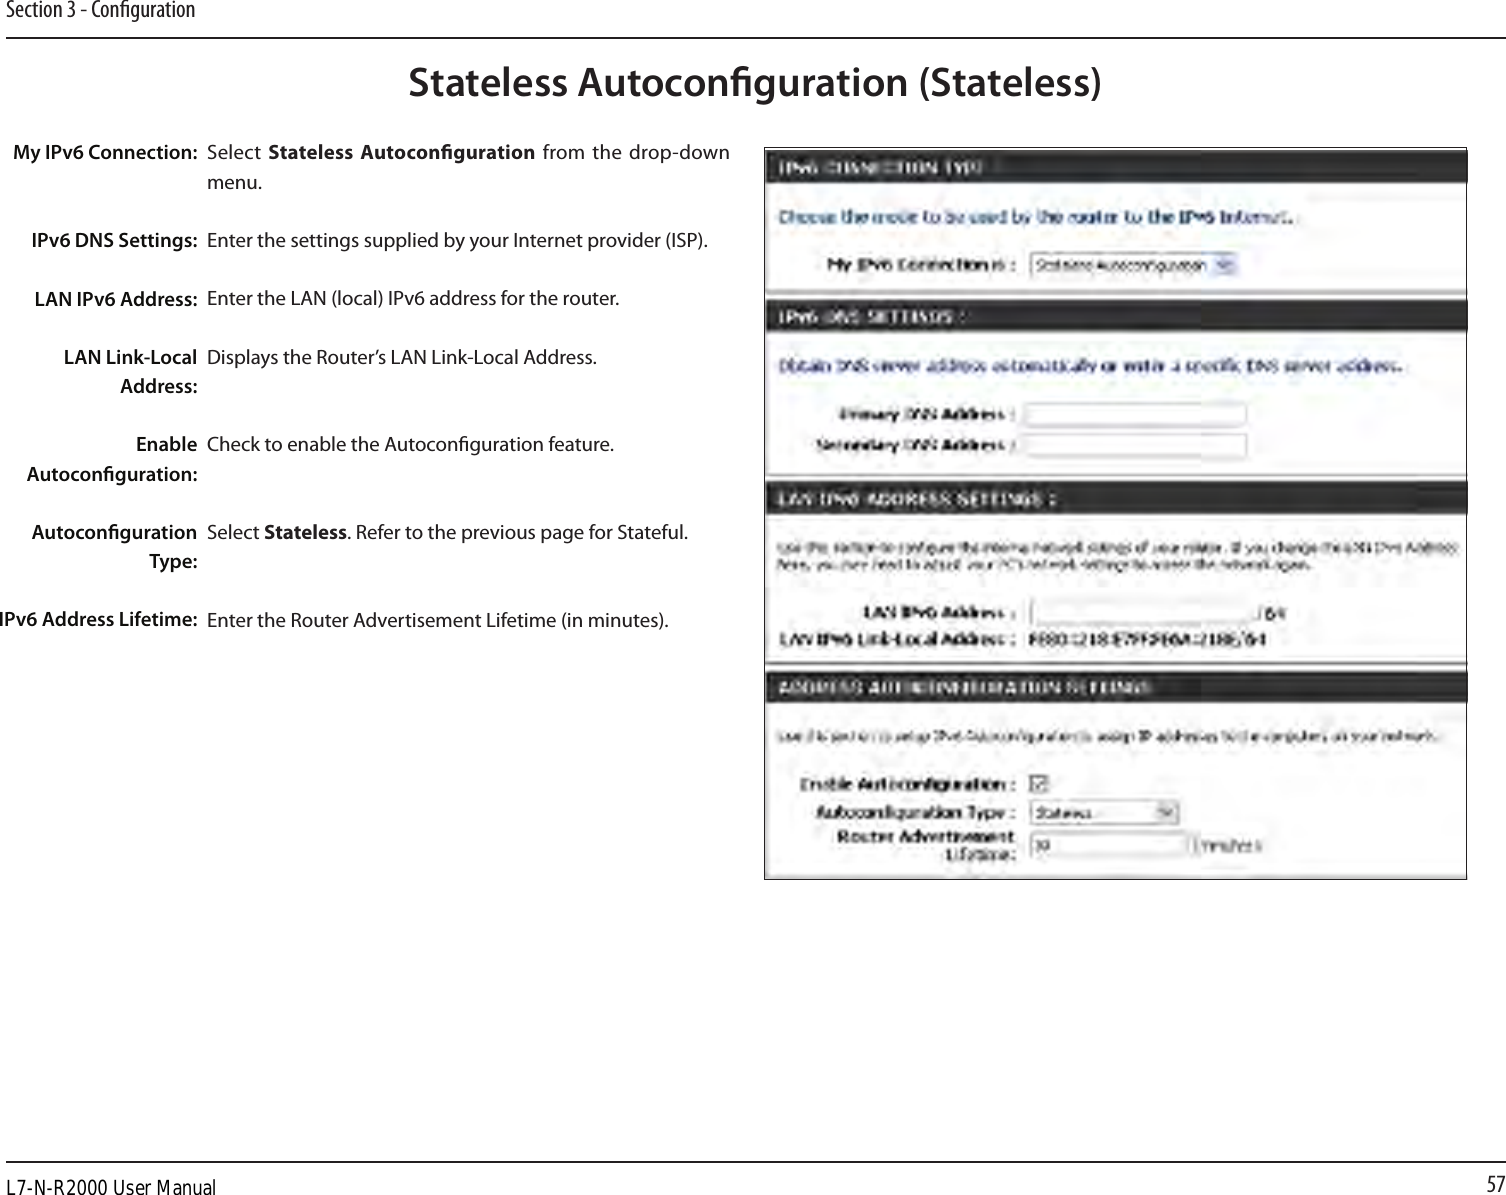 57Section 3 - CongurationStateless Autoconguration (Stateless)My IPv6 Connection:IPv6 DNS Settings:LAN IPv6 Address:LAN Link-Local Address:Enable Autoconguration:Autoconguration Type:IPv6 Address Lifetime:Select  Stateless Autoconguration  from  the  drop-down menu.Enter the settings supplied by your Internet provider (ISP). Enter the LAN (local) IPv6 address for the router. Displays the Router’s LAN Link-Local Address.Check to enable the Autoconguration feature.Select Stateless. Refer to the previous page for Stateful.Enter the Router Advertisement Lifetime (in minutes).L7-N-R2000 User Manual